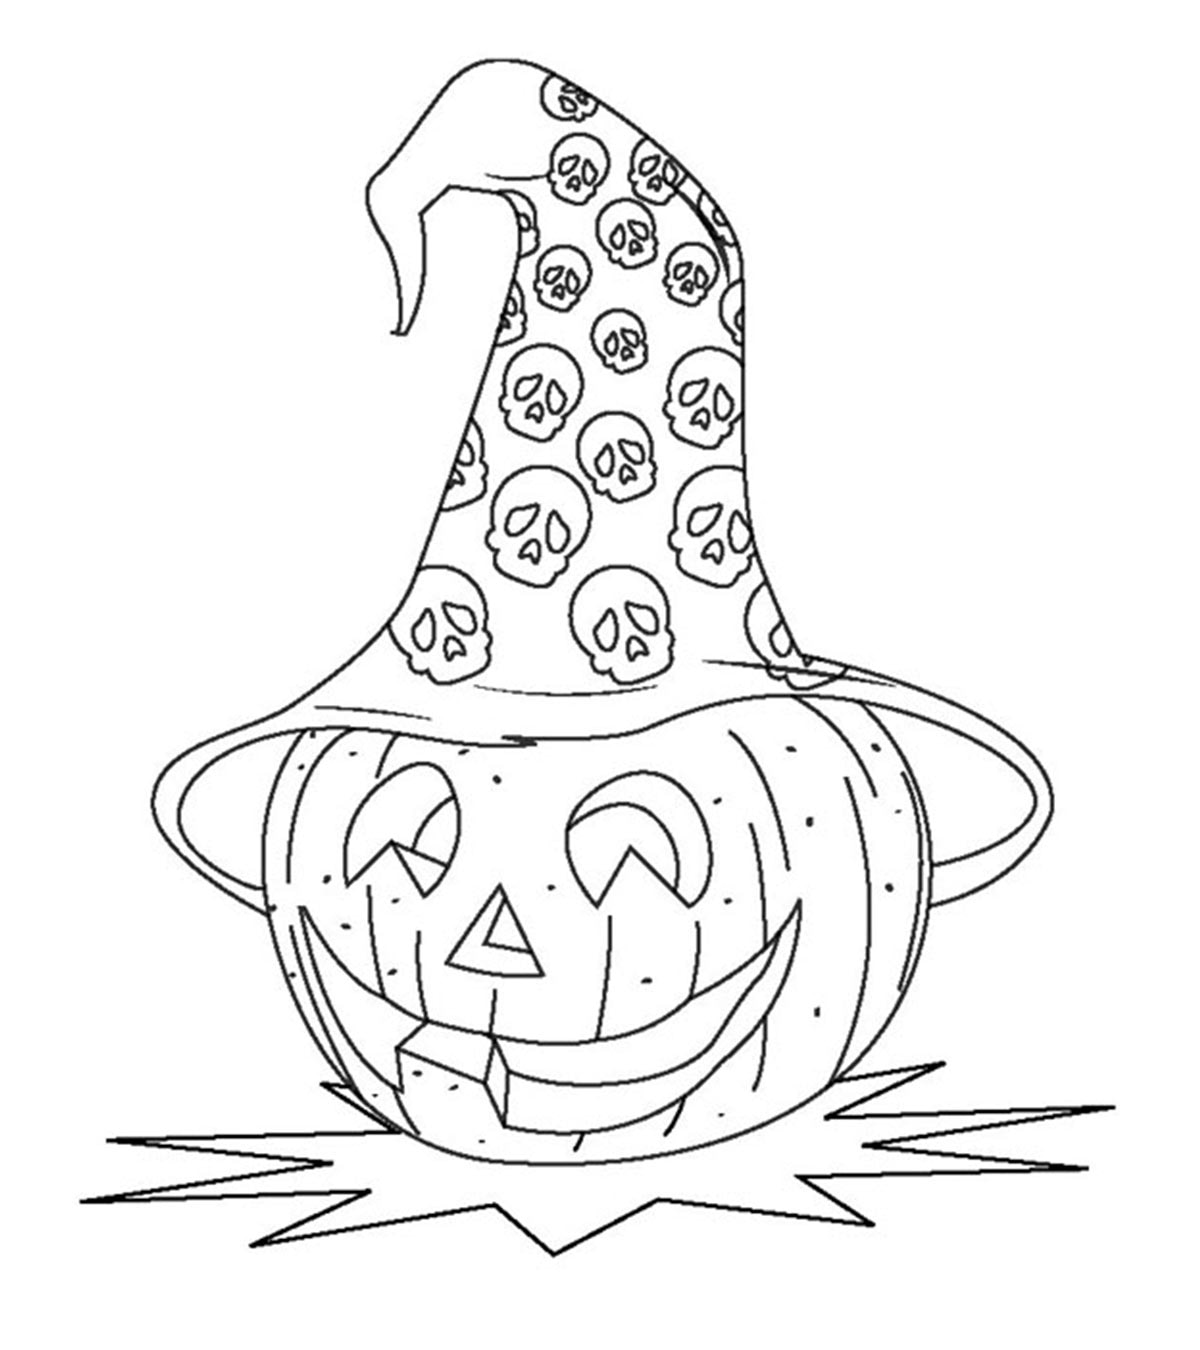 10 Cute Halloween Pumpkin Coloring Pages Your Toddler Will Love To Color_image